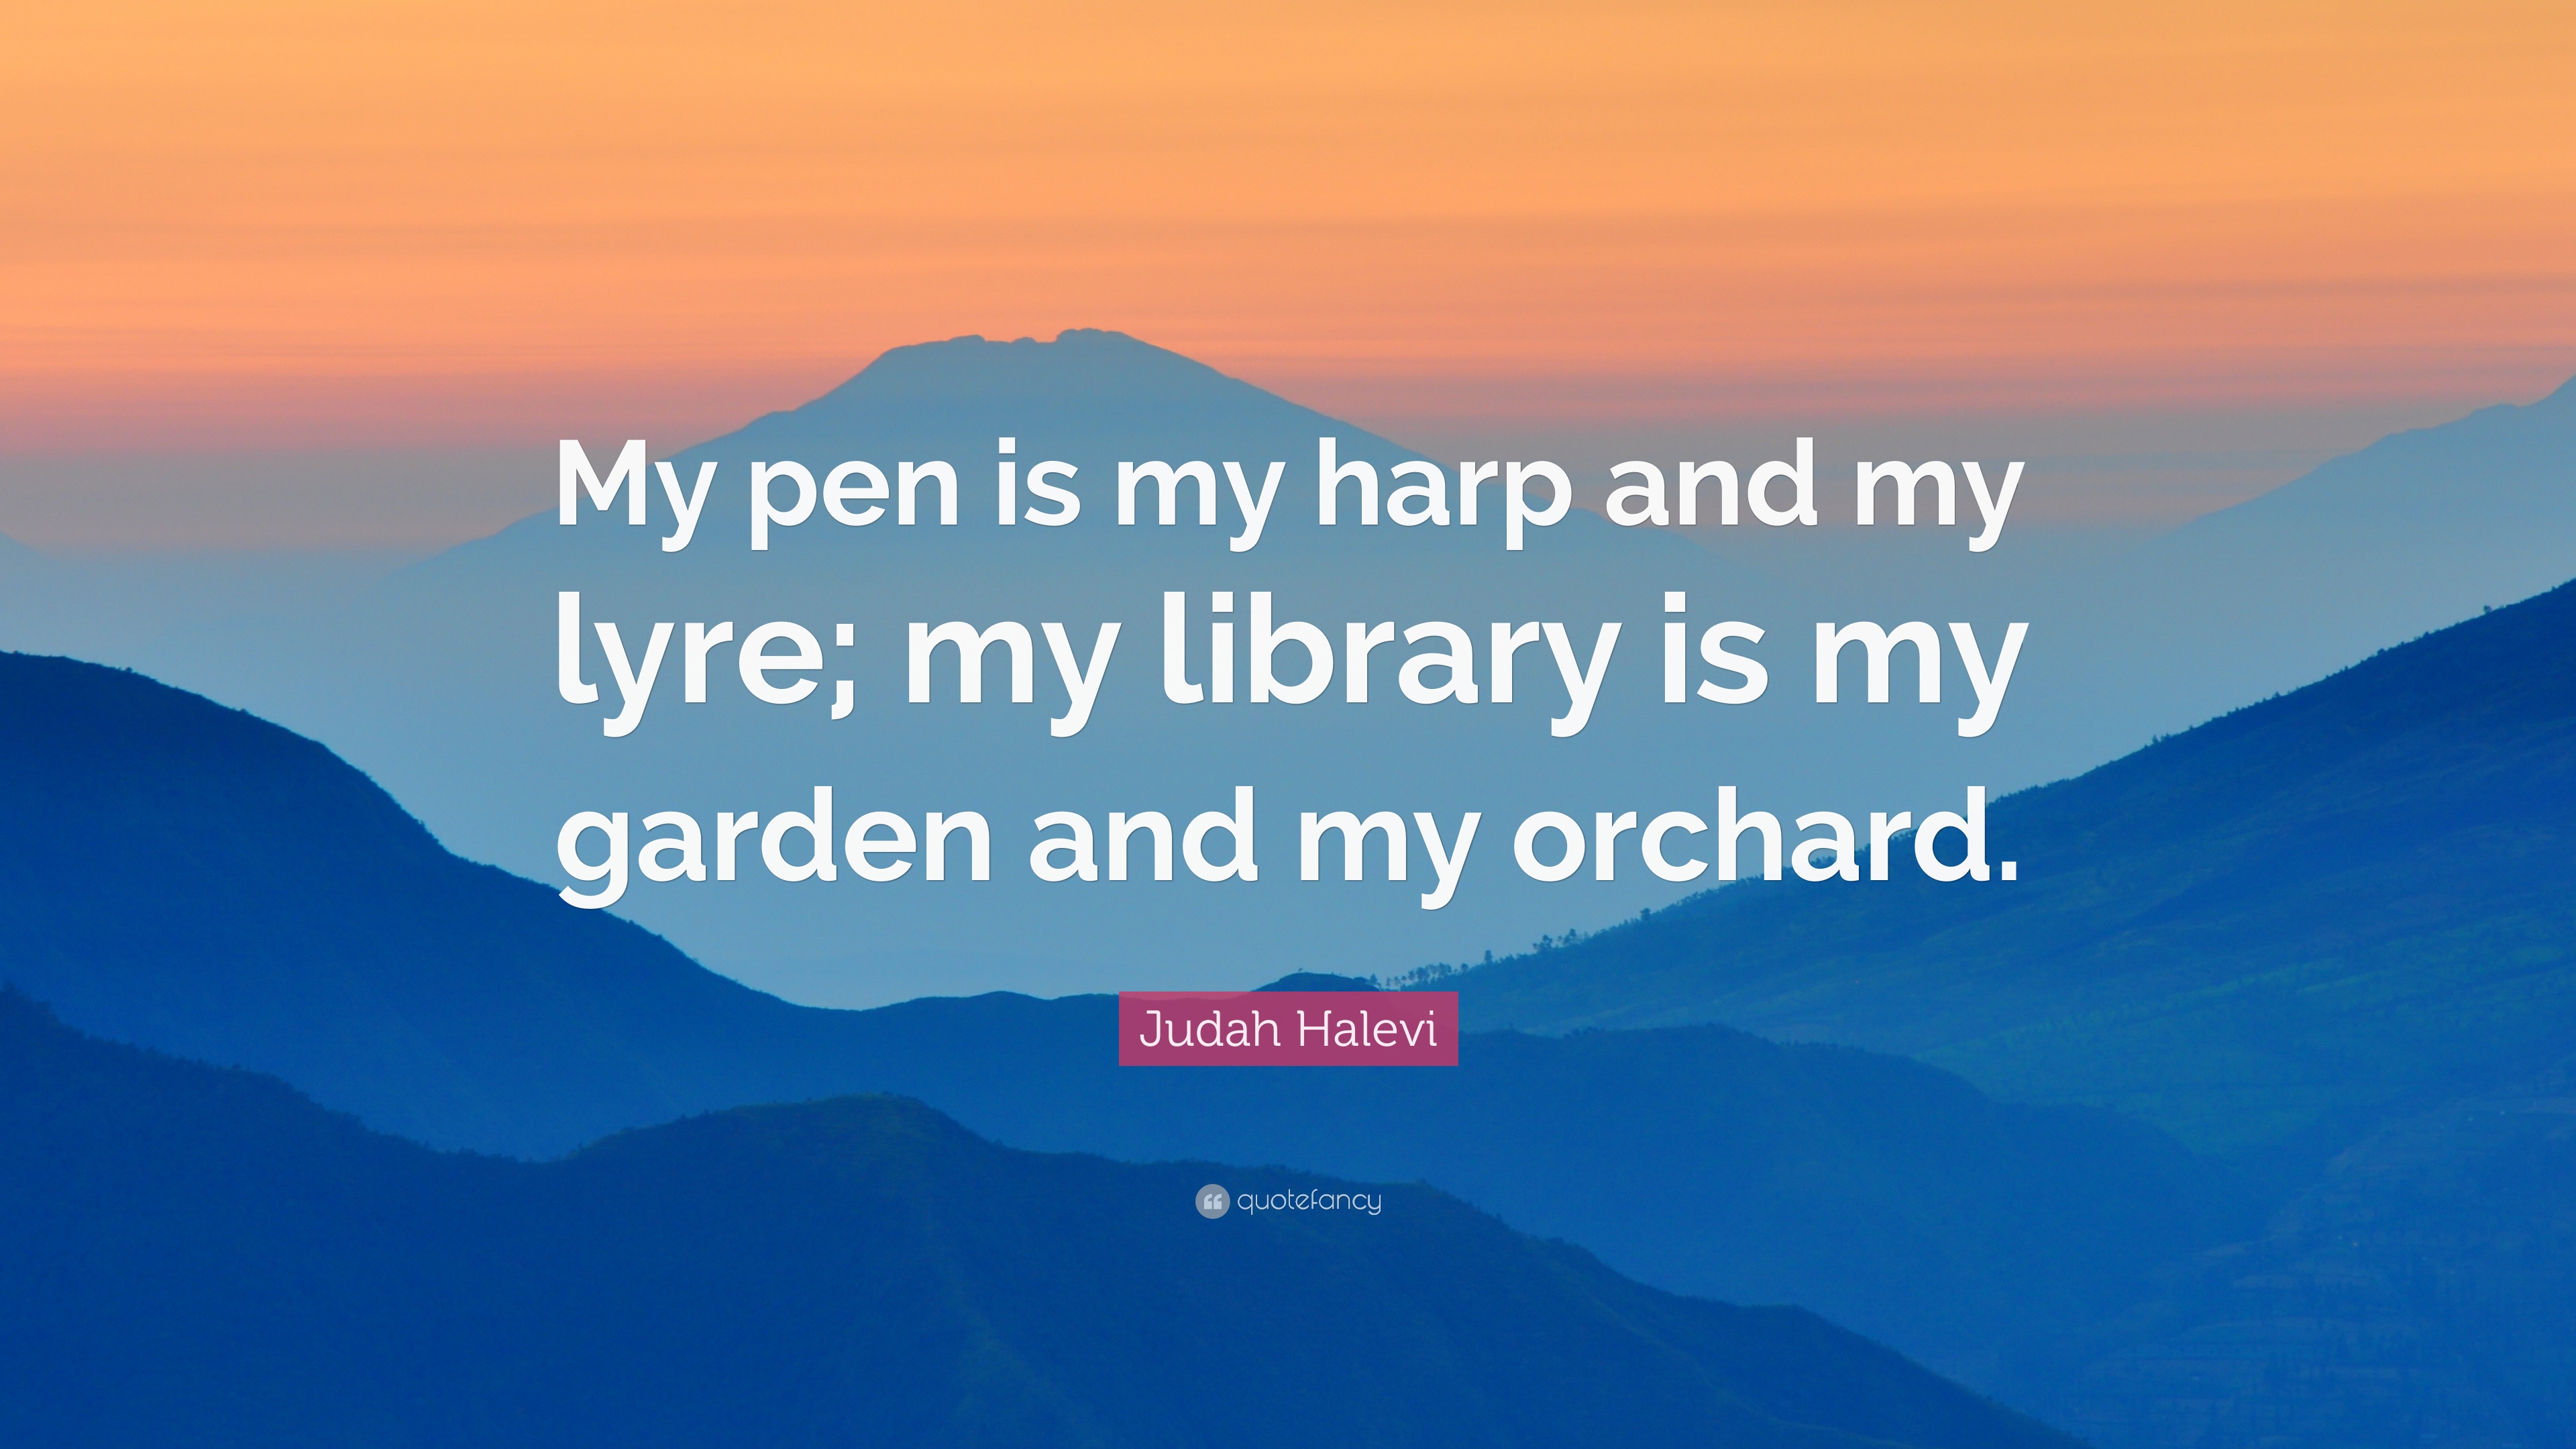 Judah Halevi Quote: “My pen is my harp and my lyre; my library is my